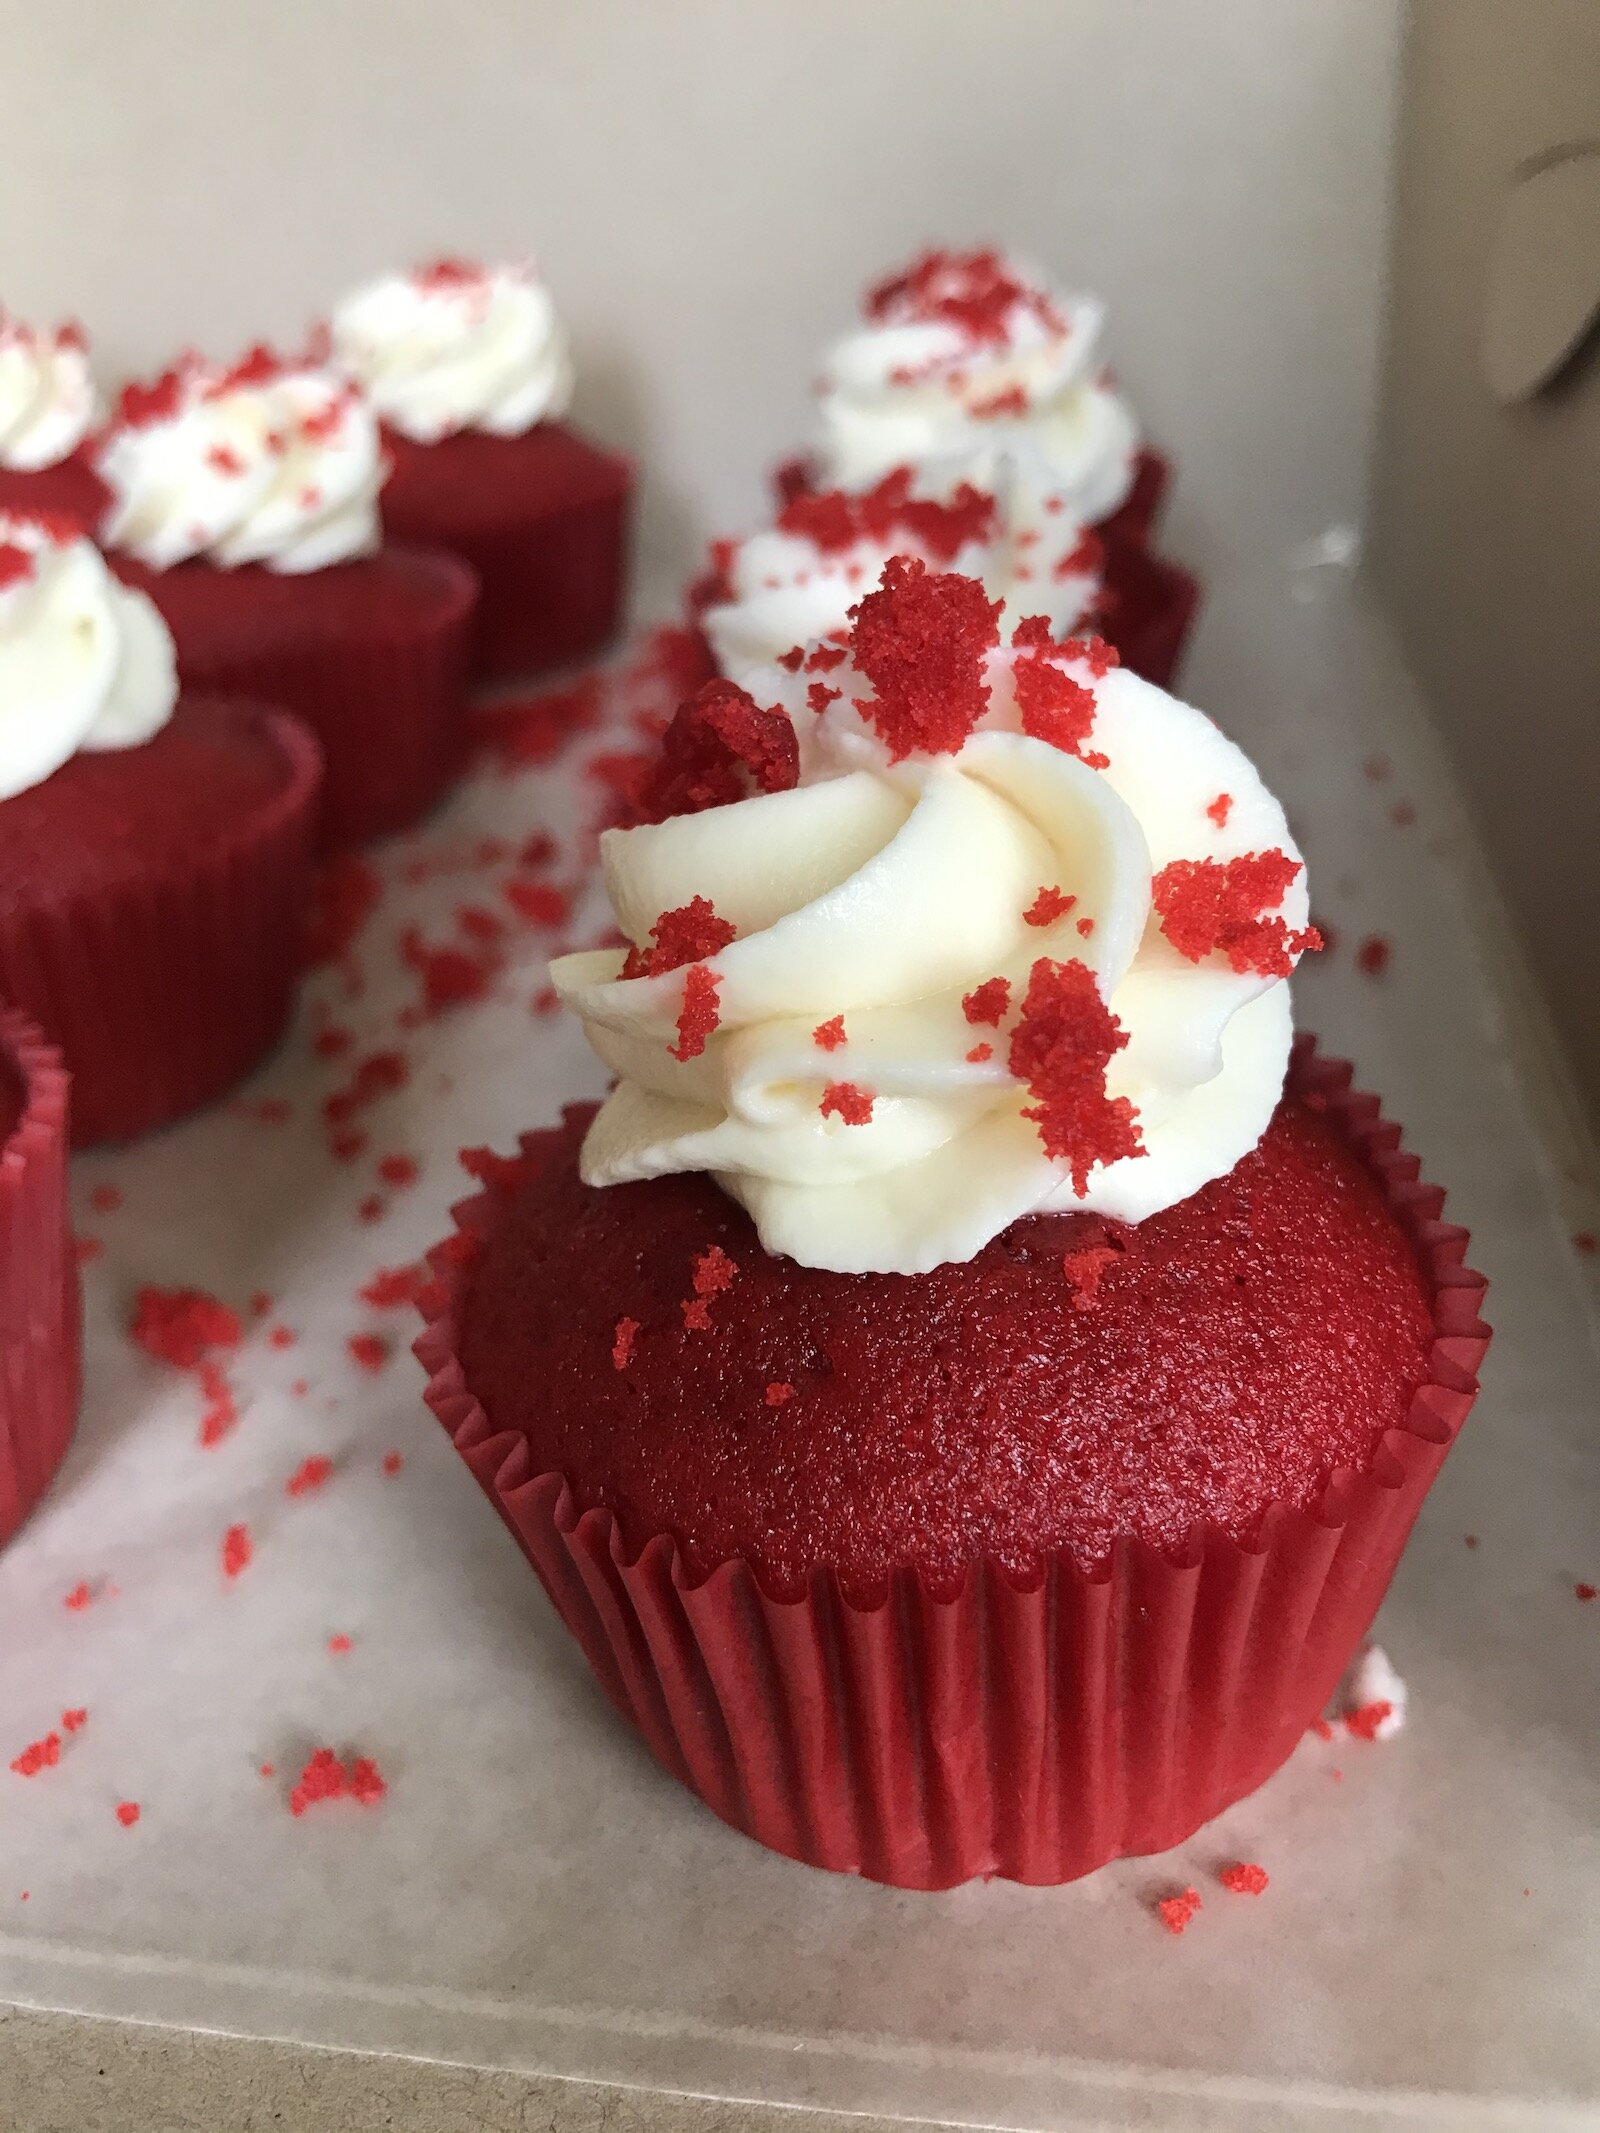 A red velvet cupcake, made by Puff's Pastries.